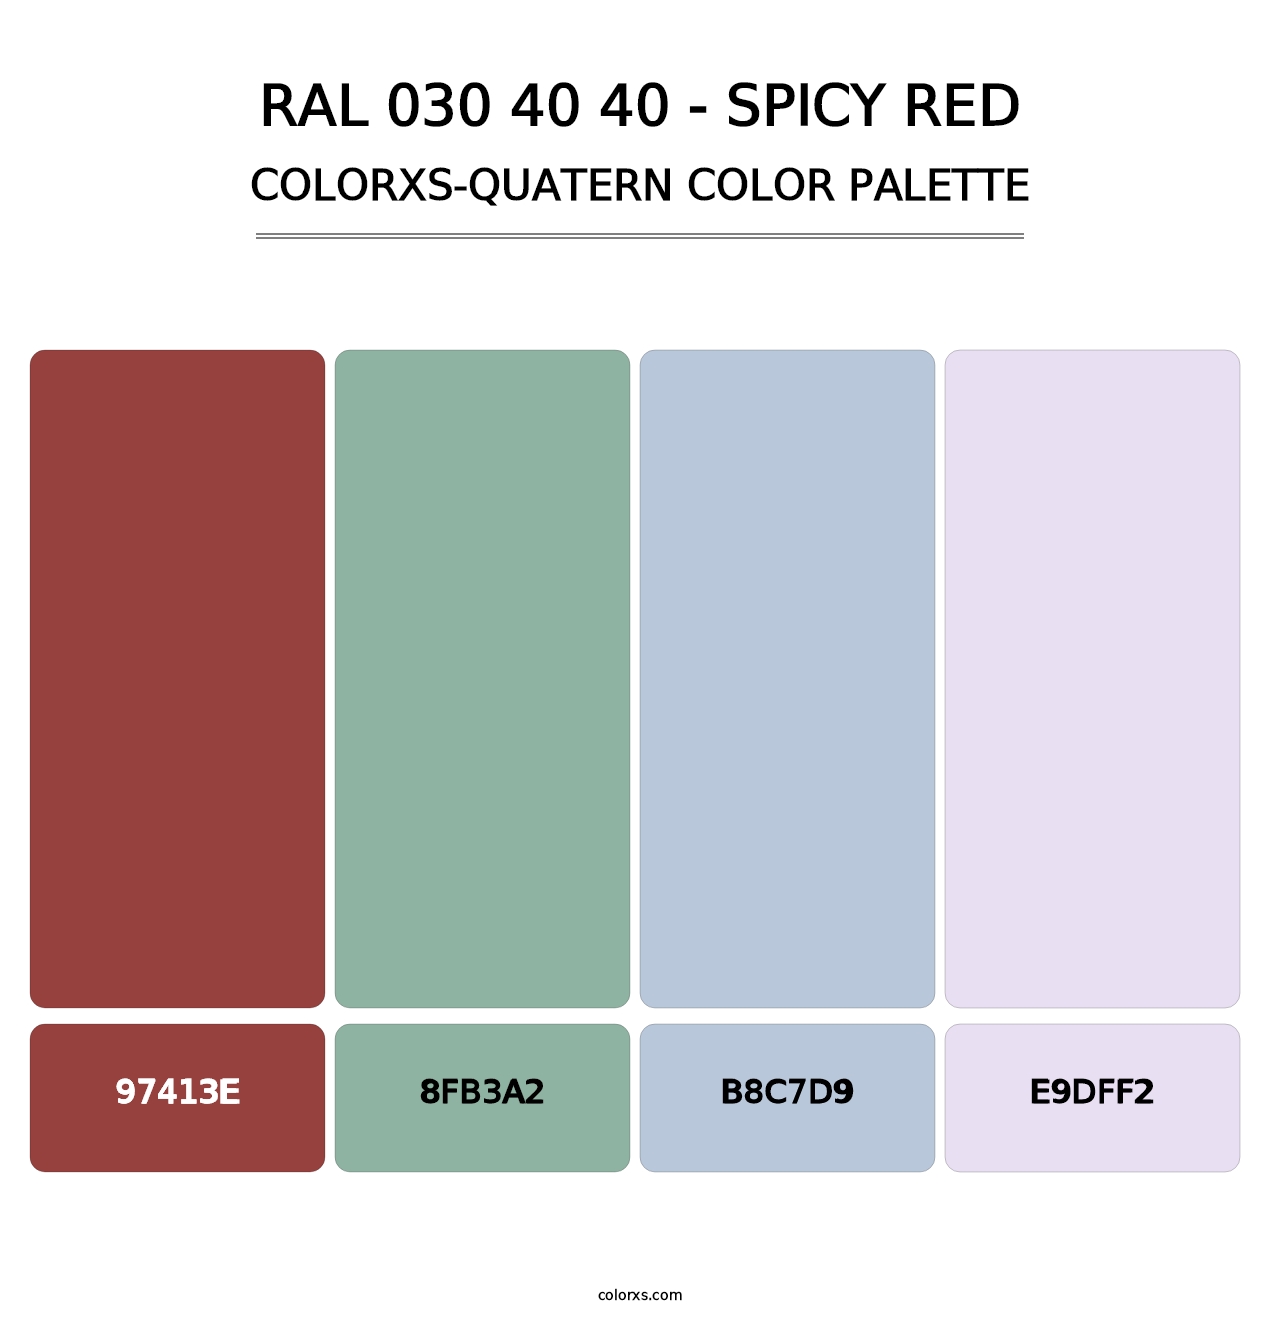 RAL 030 40 40 - Spicy Red - Colorxs Quatern Palette